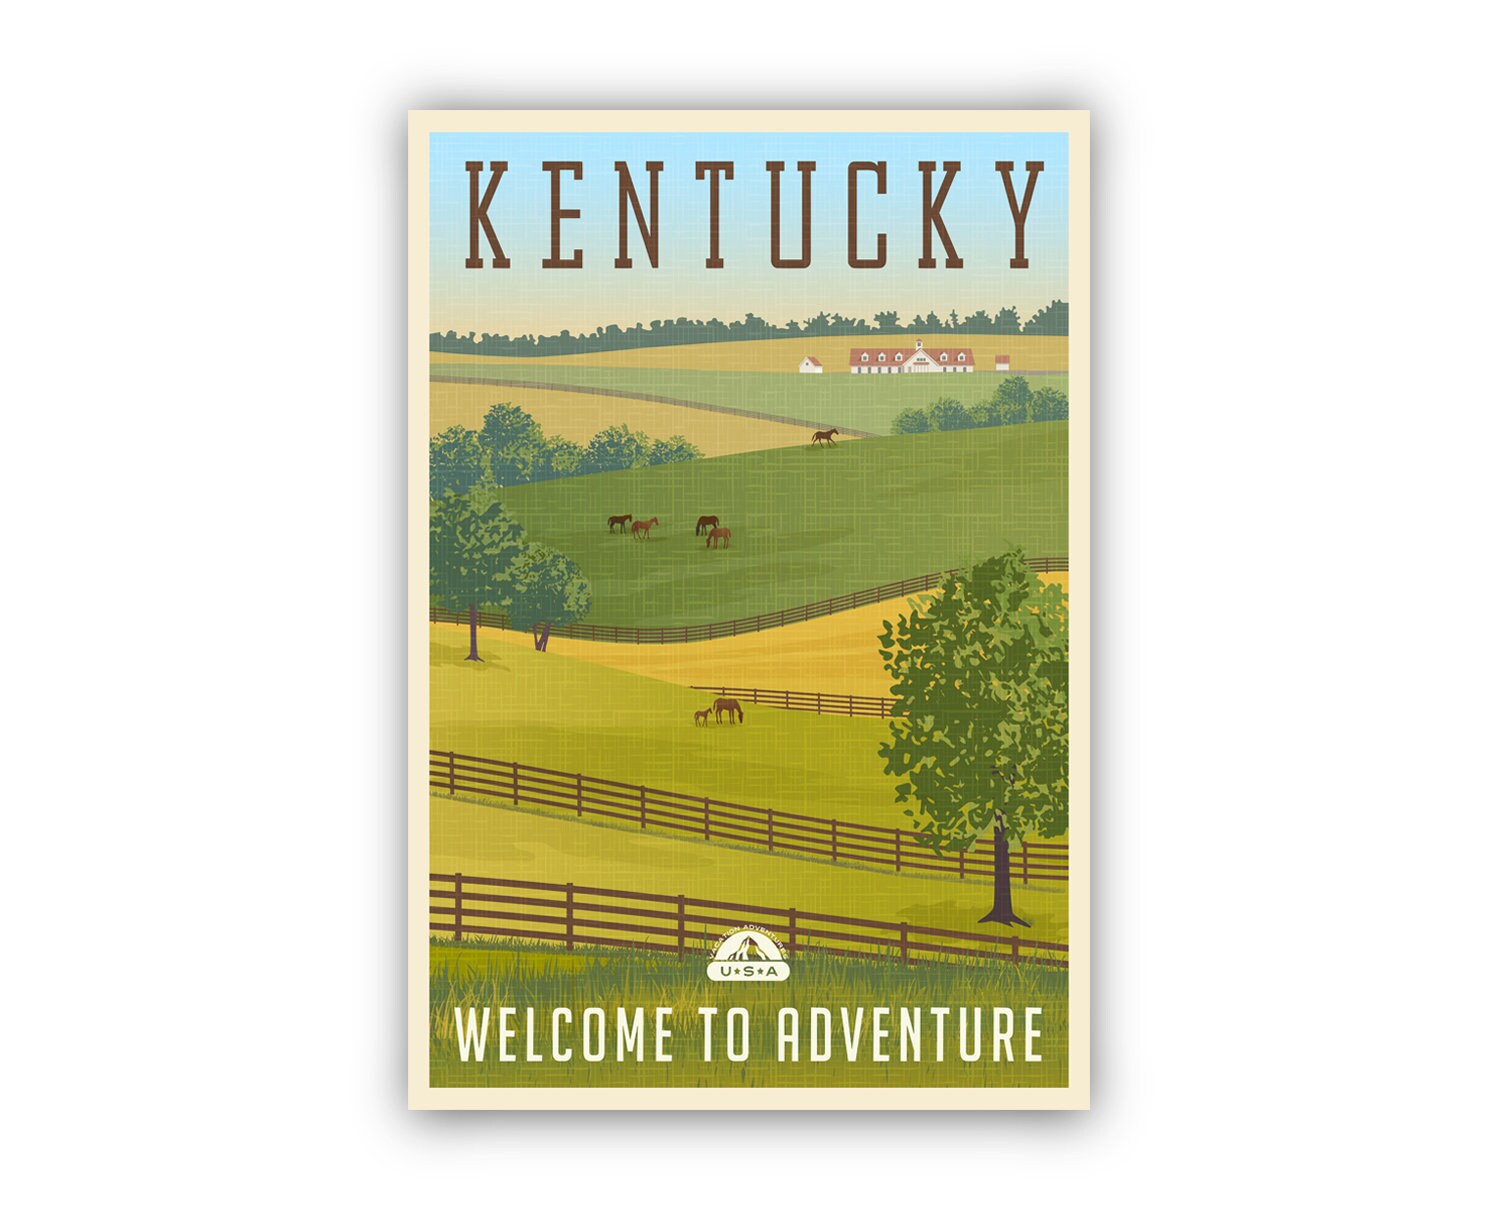 Retro Style Travel Poster, Kentucky Vintage Rustic Poster Print, Home Wall Art, Office Wall Decor, Poster Prints, Kentucky, State Map Poster